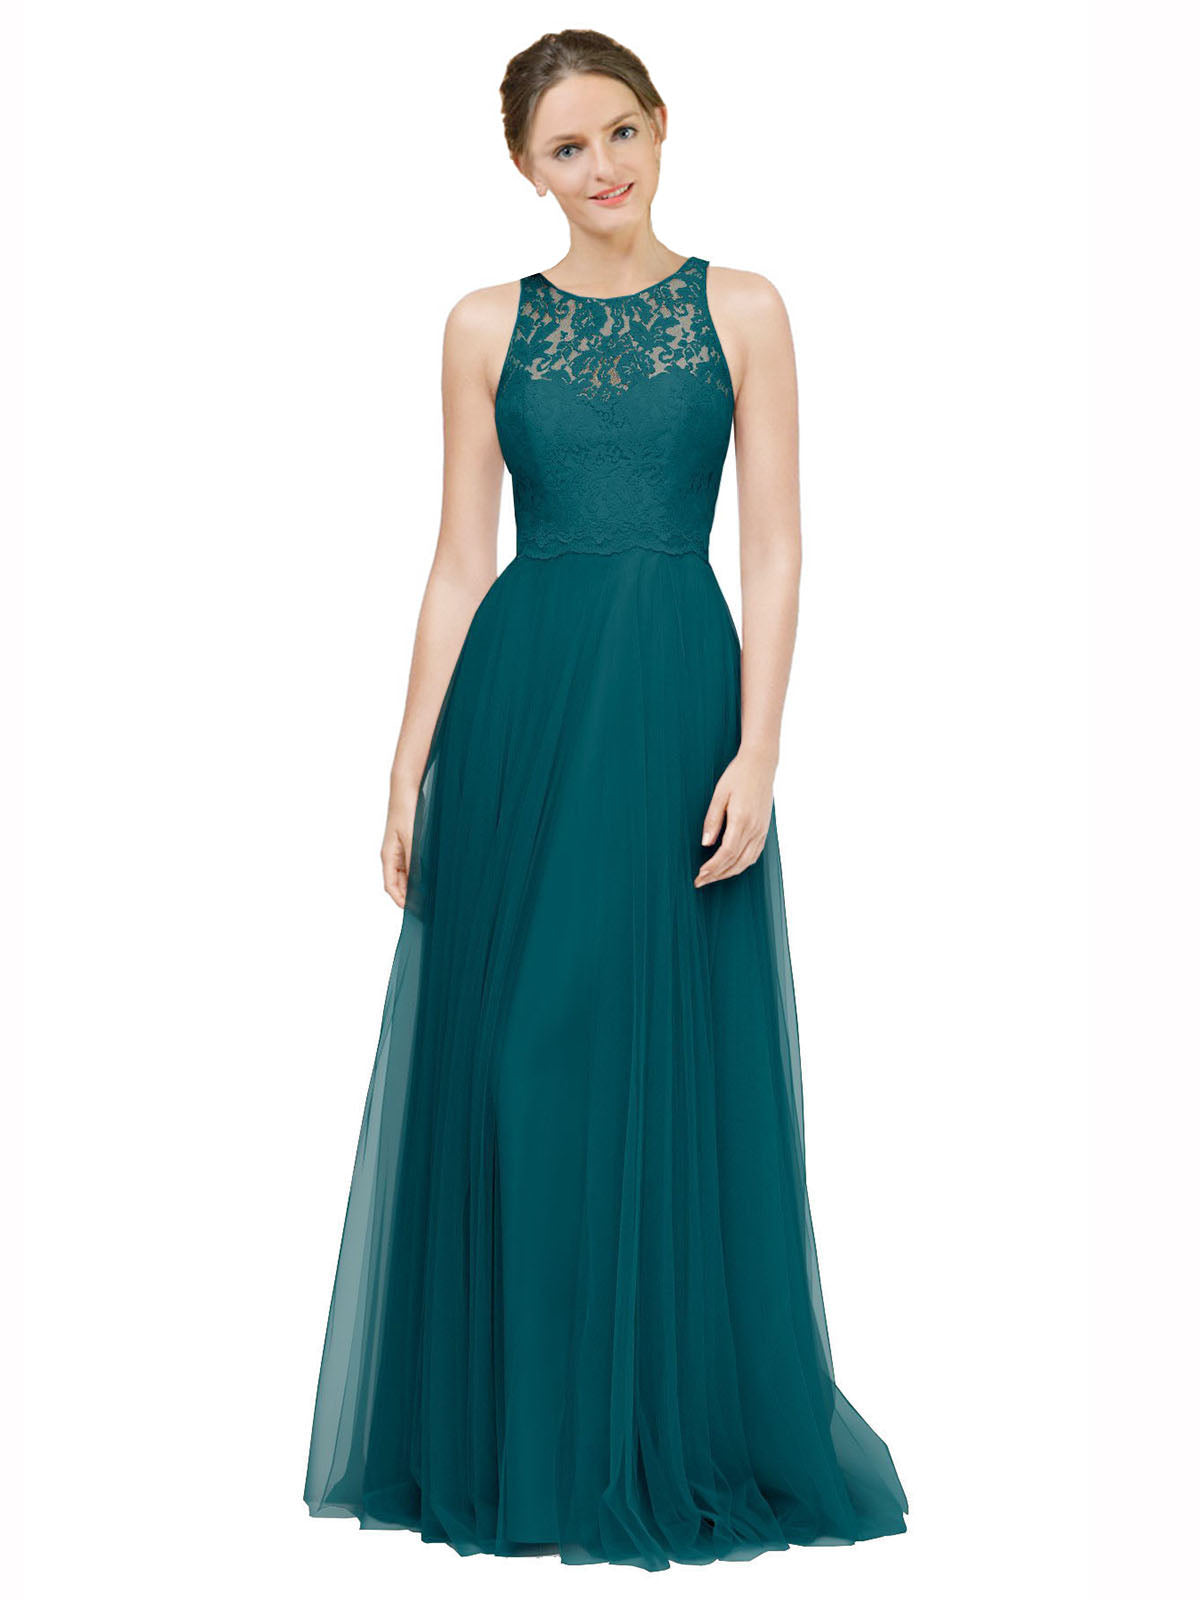 Long A-Line Illusion High Neck Sleeveless Turquoise Tulle Lace Bridesmaid Dress Alma